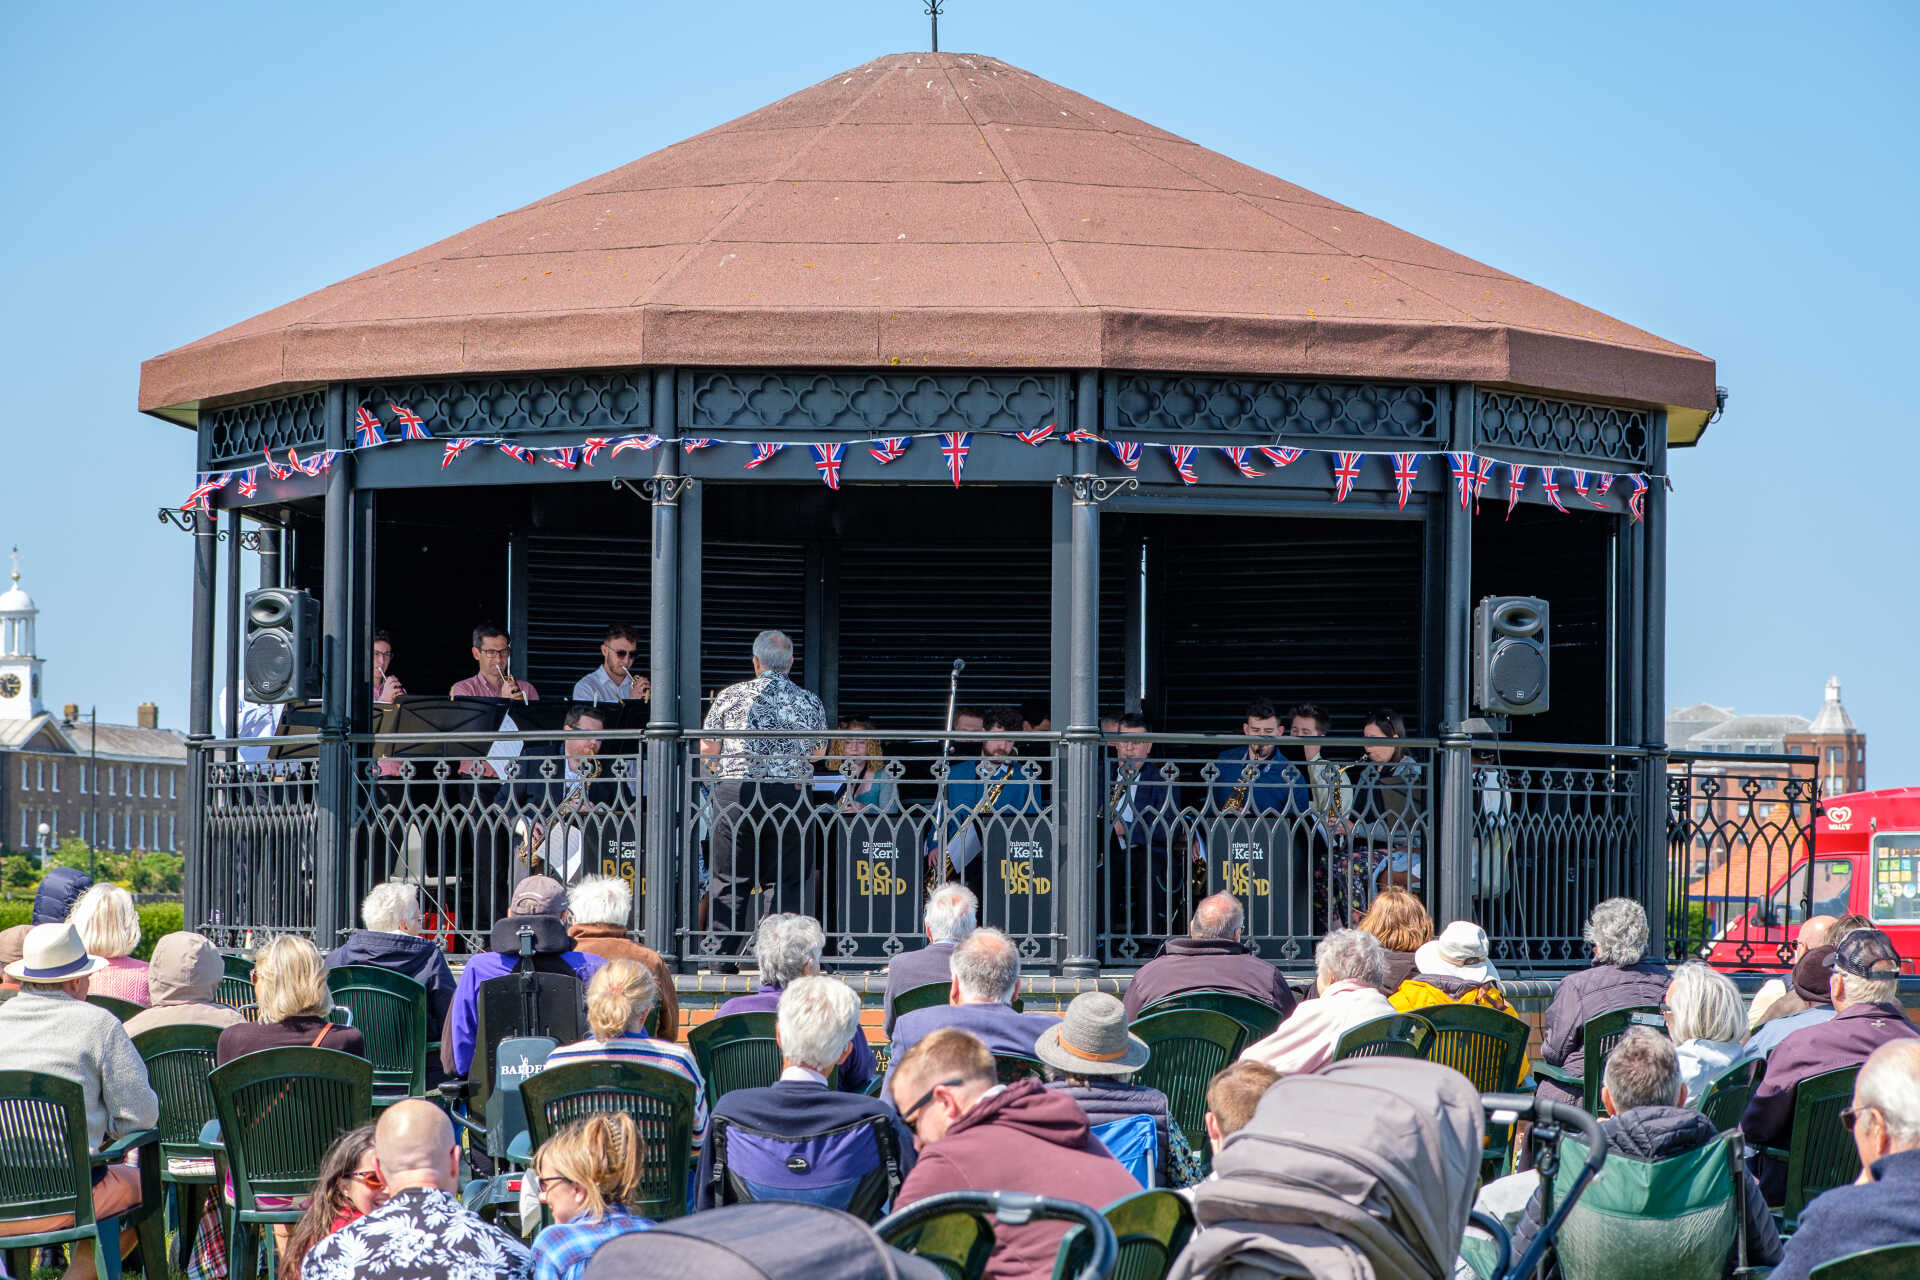 Musicians playing at a bandstand on a greensward, audience looking on